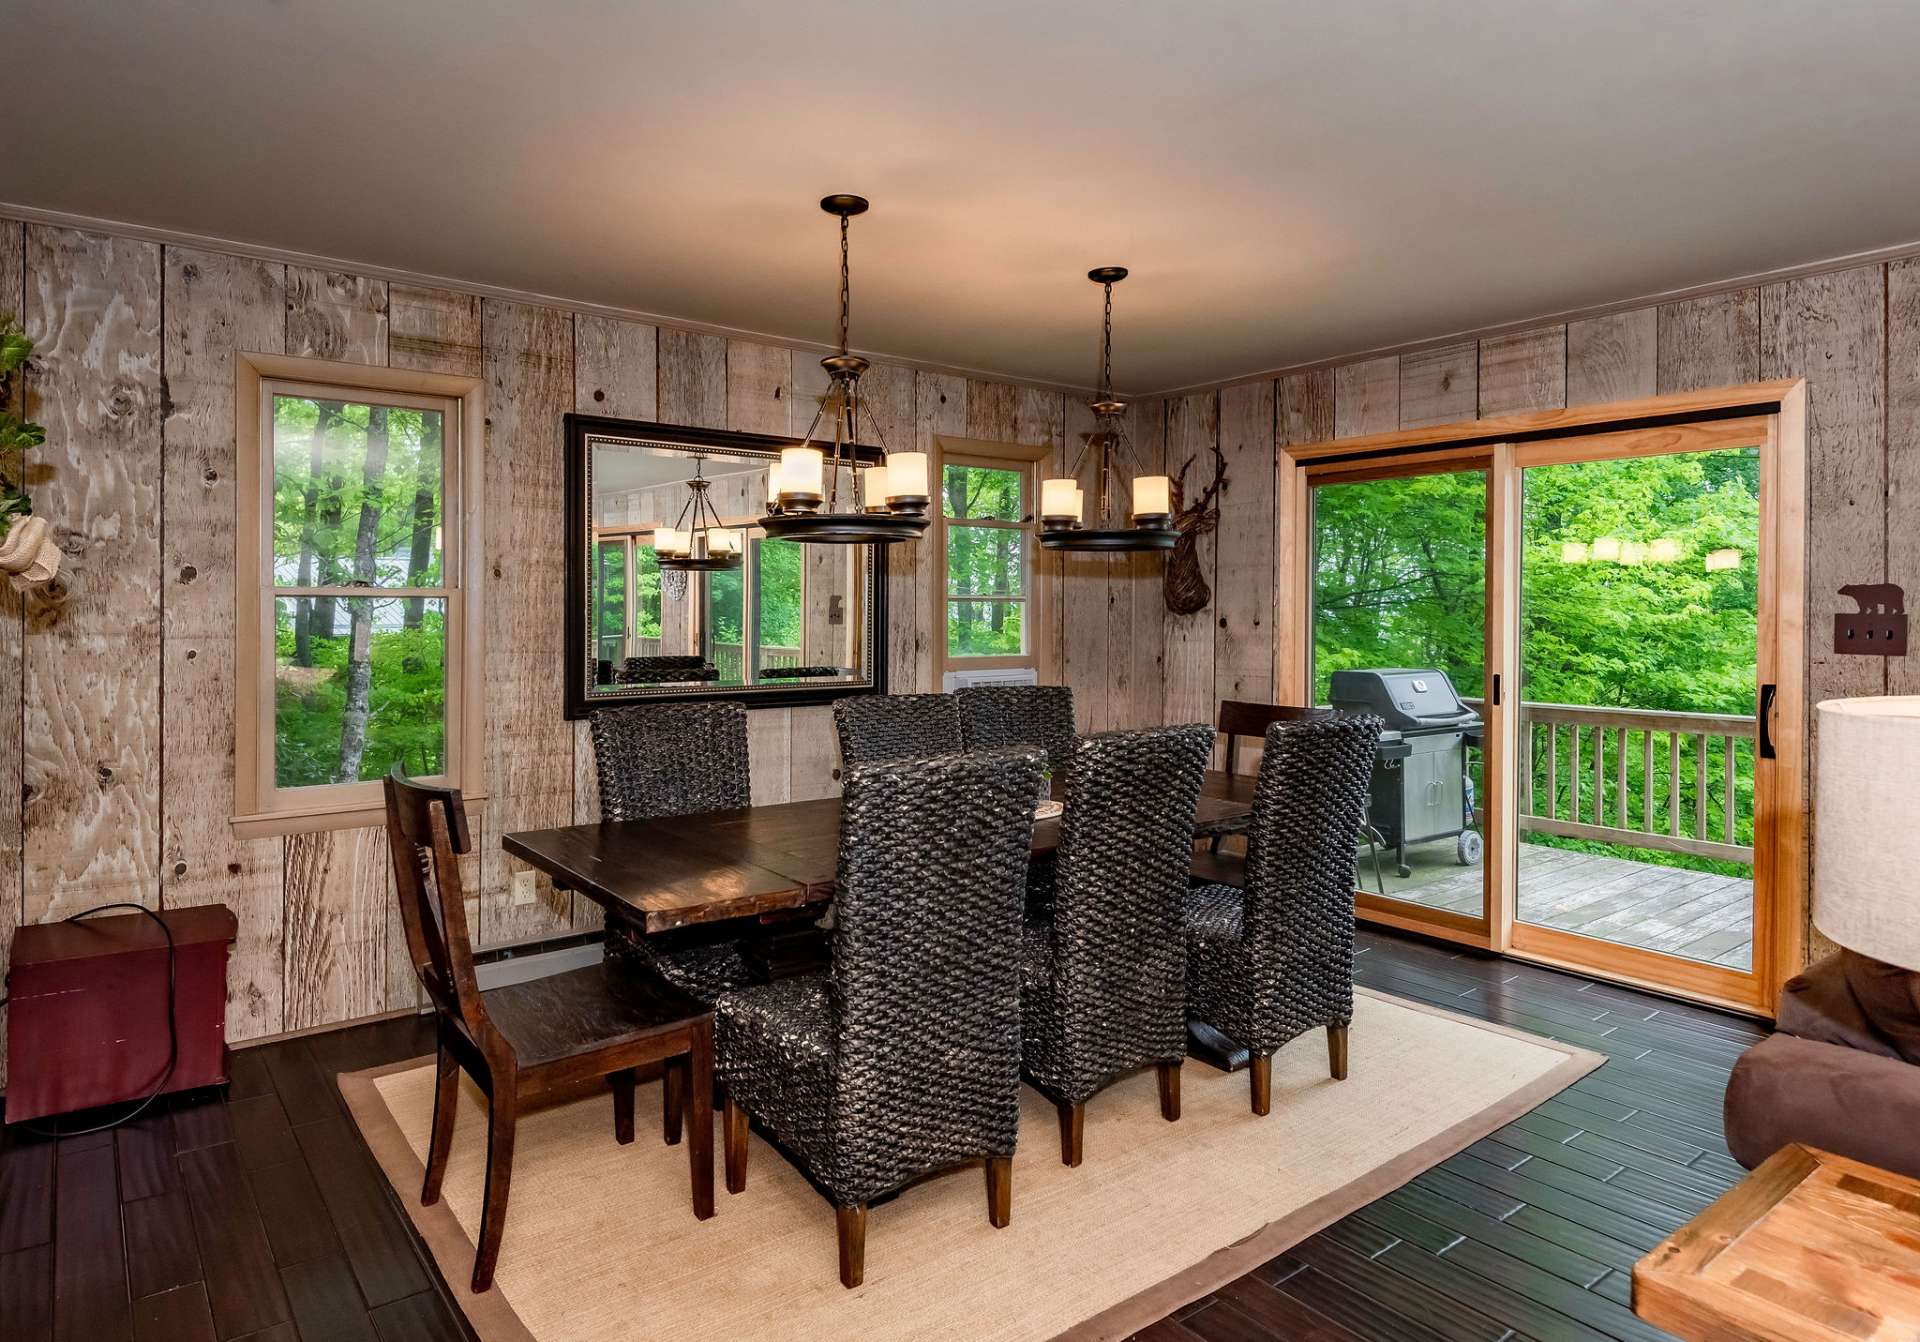 Entertain dinner guests in the dining area where you can enjoy the outdoor scenery.